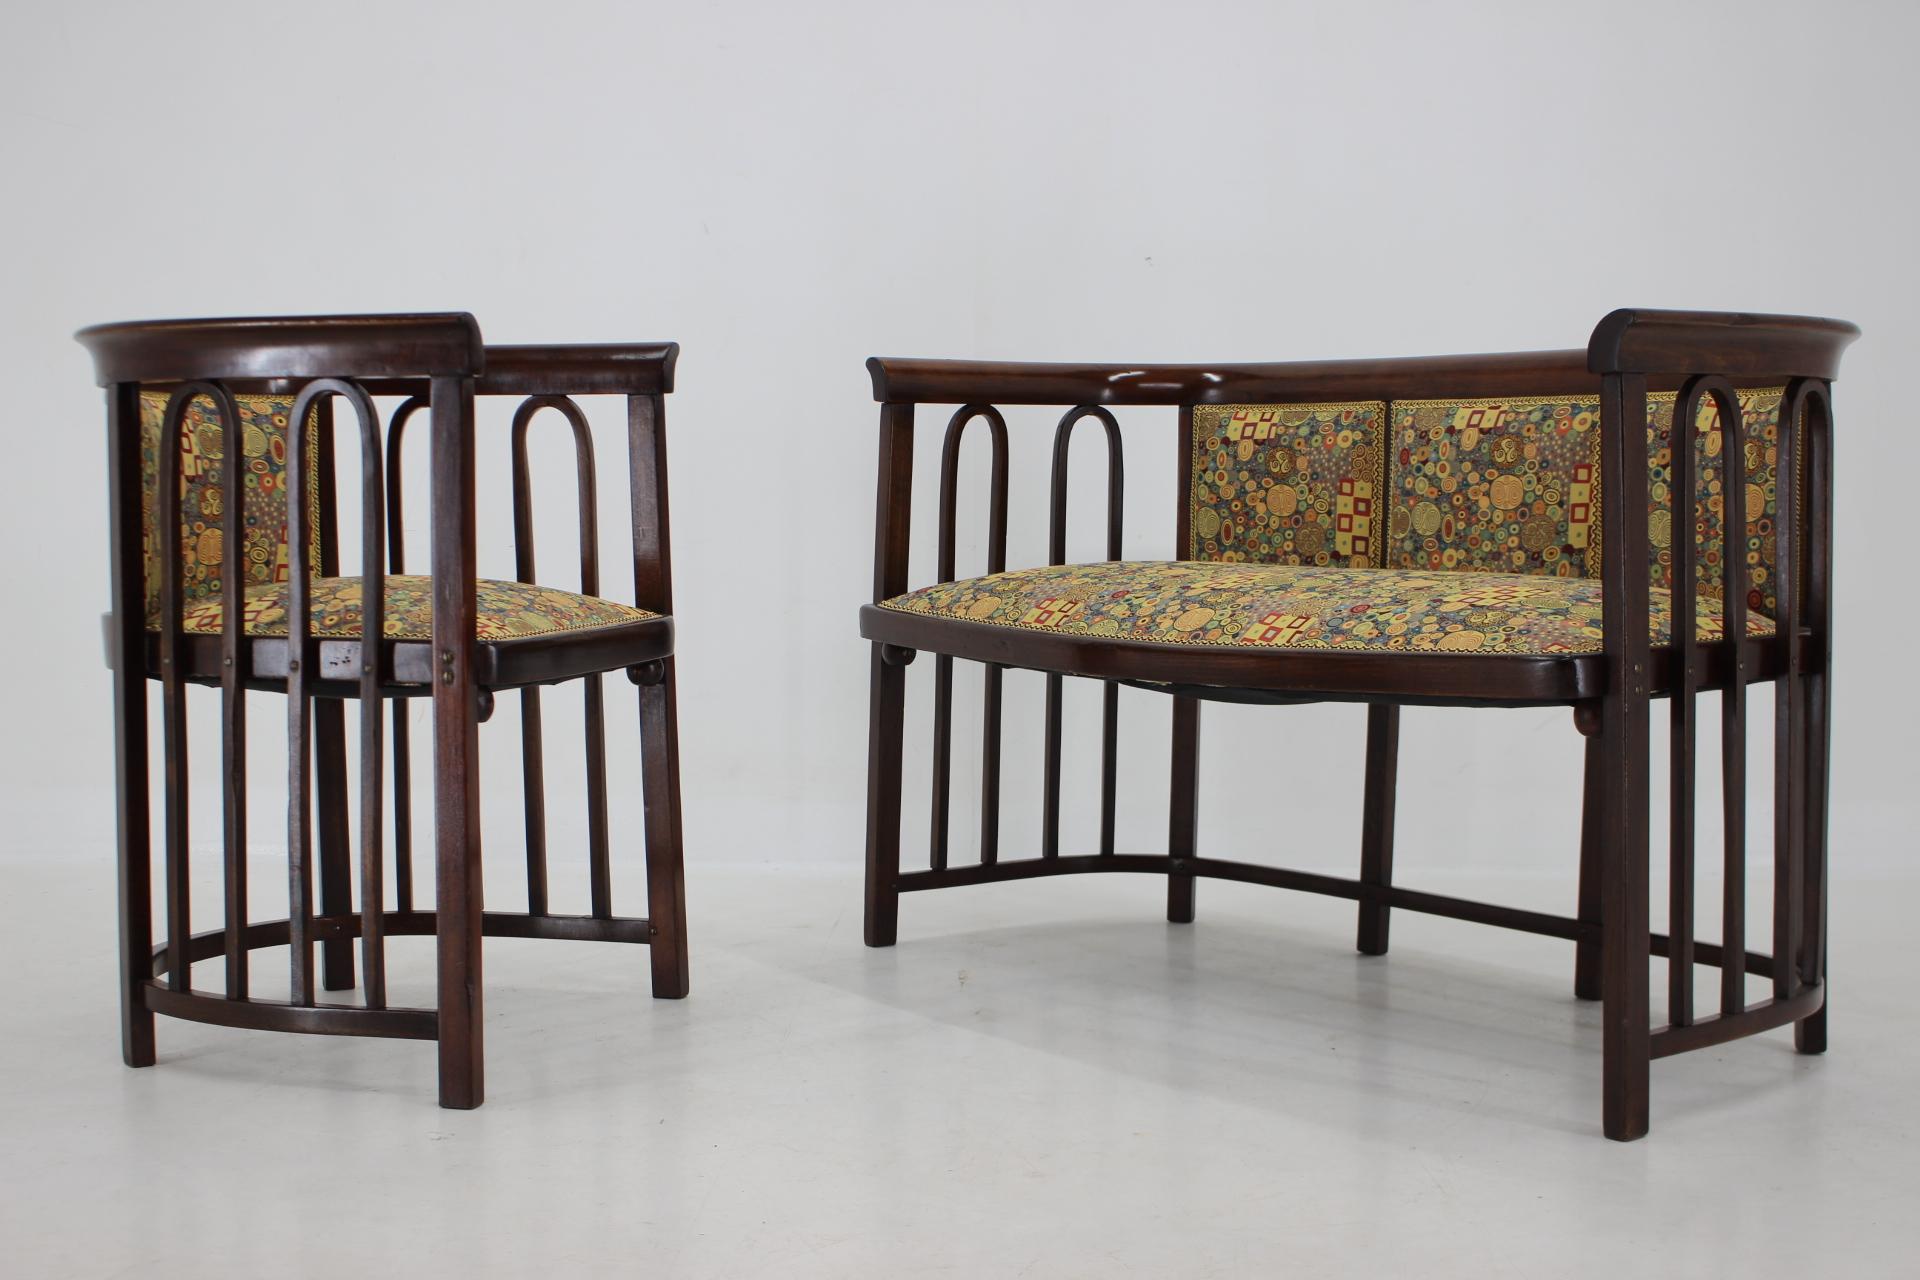 - Carefully refurbished and finished in Shellac
- Professionally reupholstered in old technique and quality fabric designed by Gustav Klimt 
- dimensions: 75 (45) 121 63 ; 75 (45) 56 58.